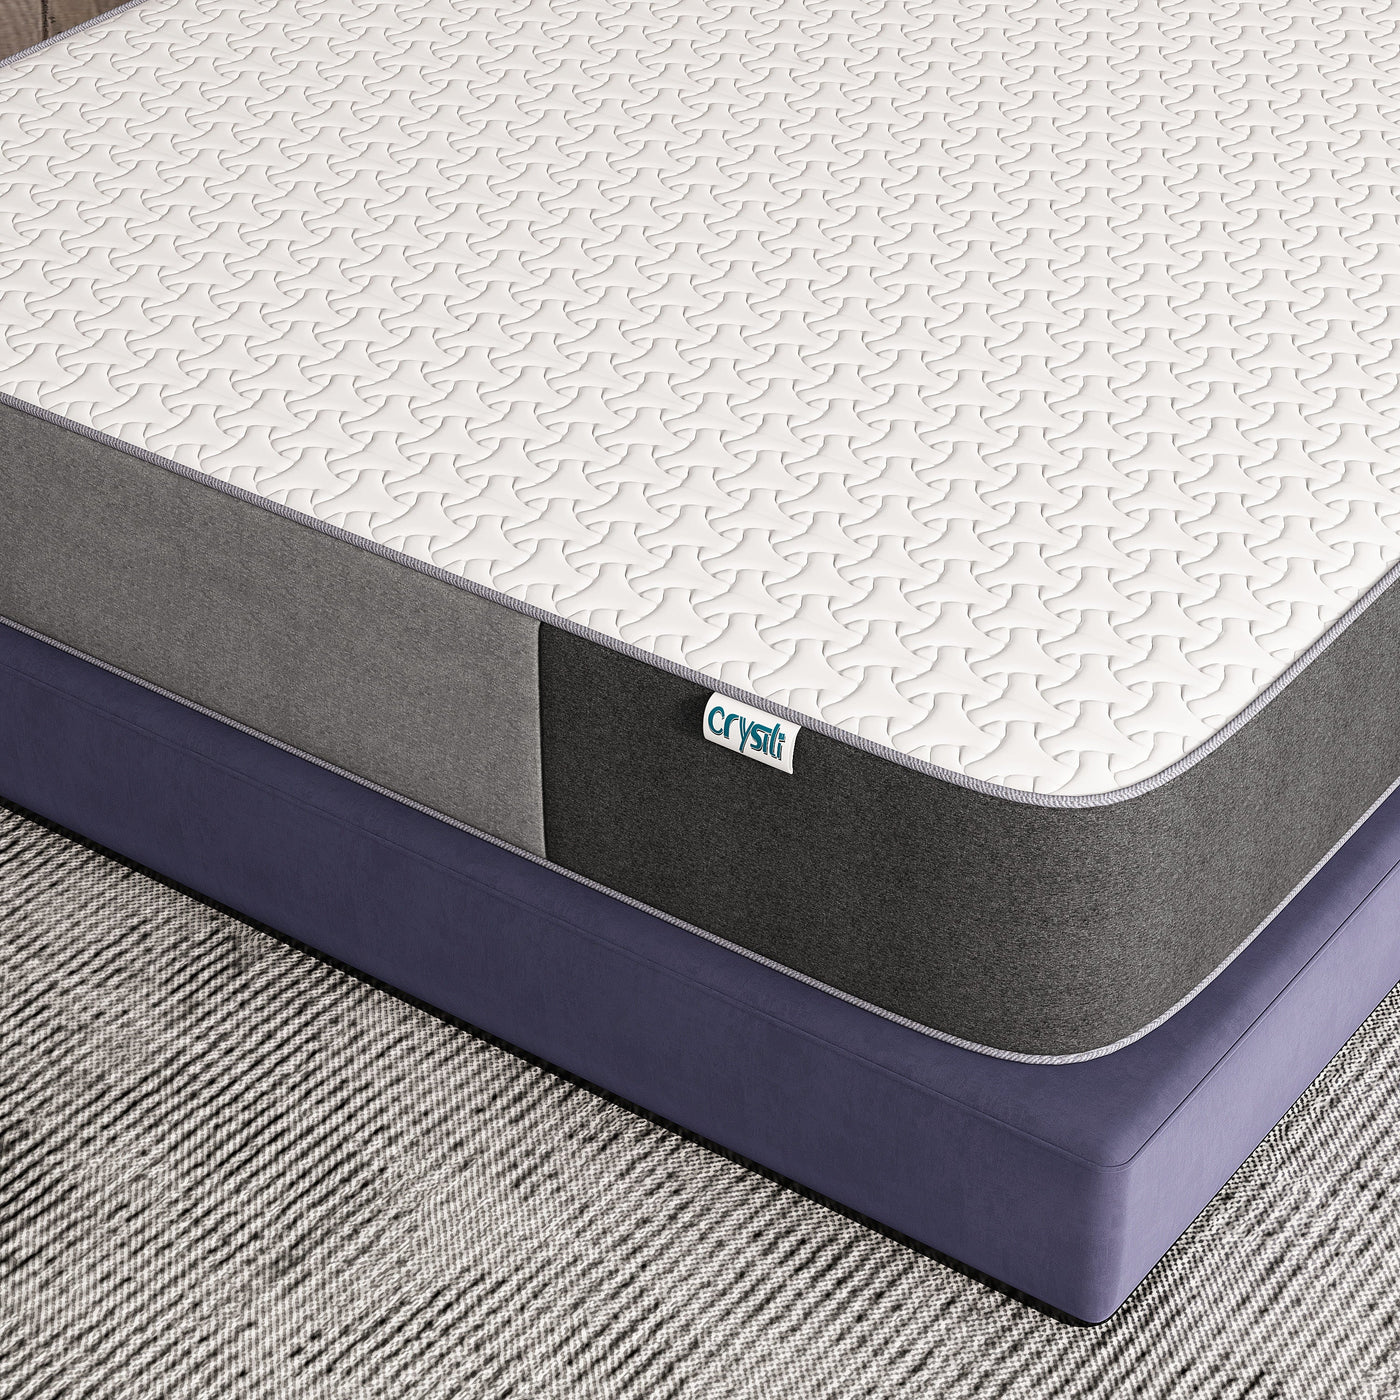 Big Promotion Crystli DC Collection| 6 inch Memory Foam Mattress with CertiPUR-US Certified (CA)